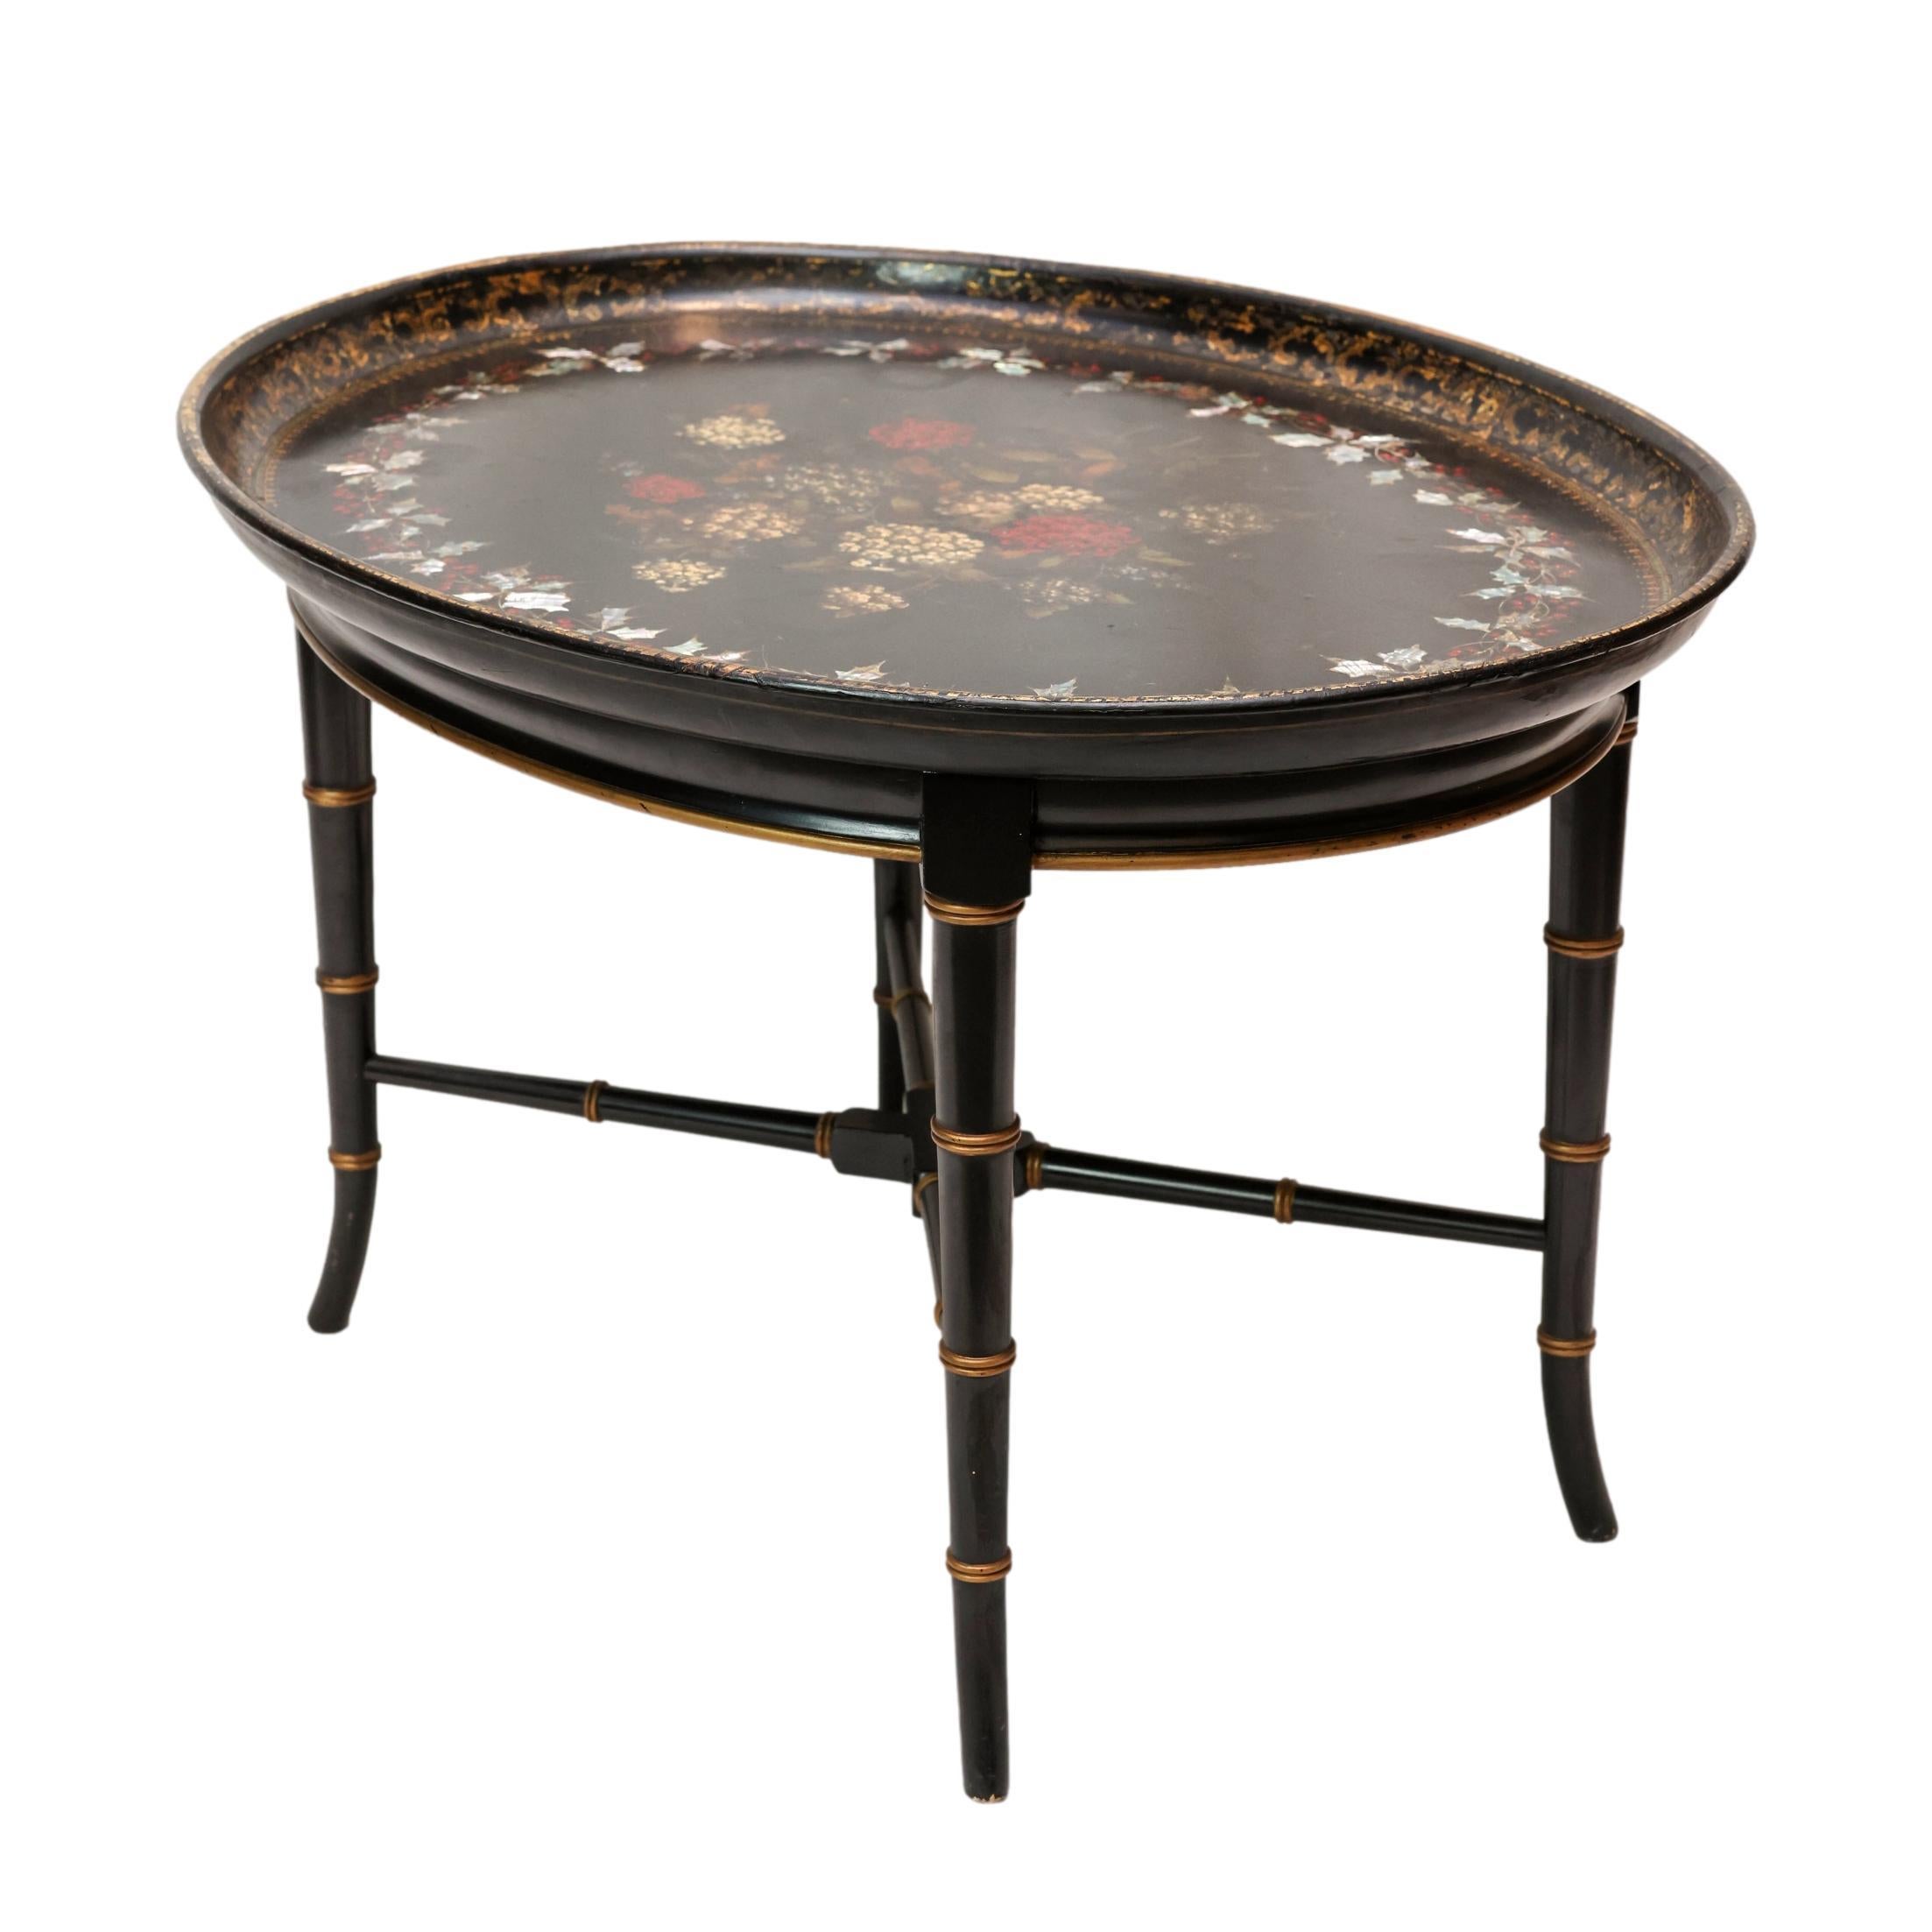 Mother-of-Pearl Inlaid and Ebonized Paper Mache Tray Table, English, ca. 1850 For Sale 1